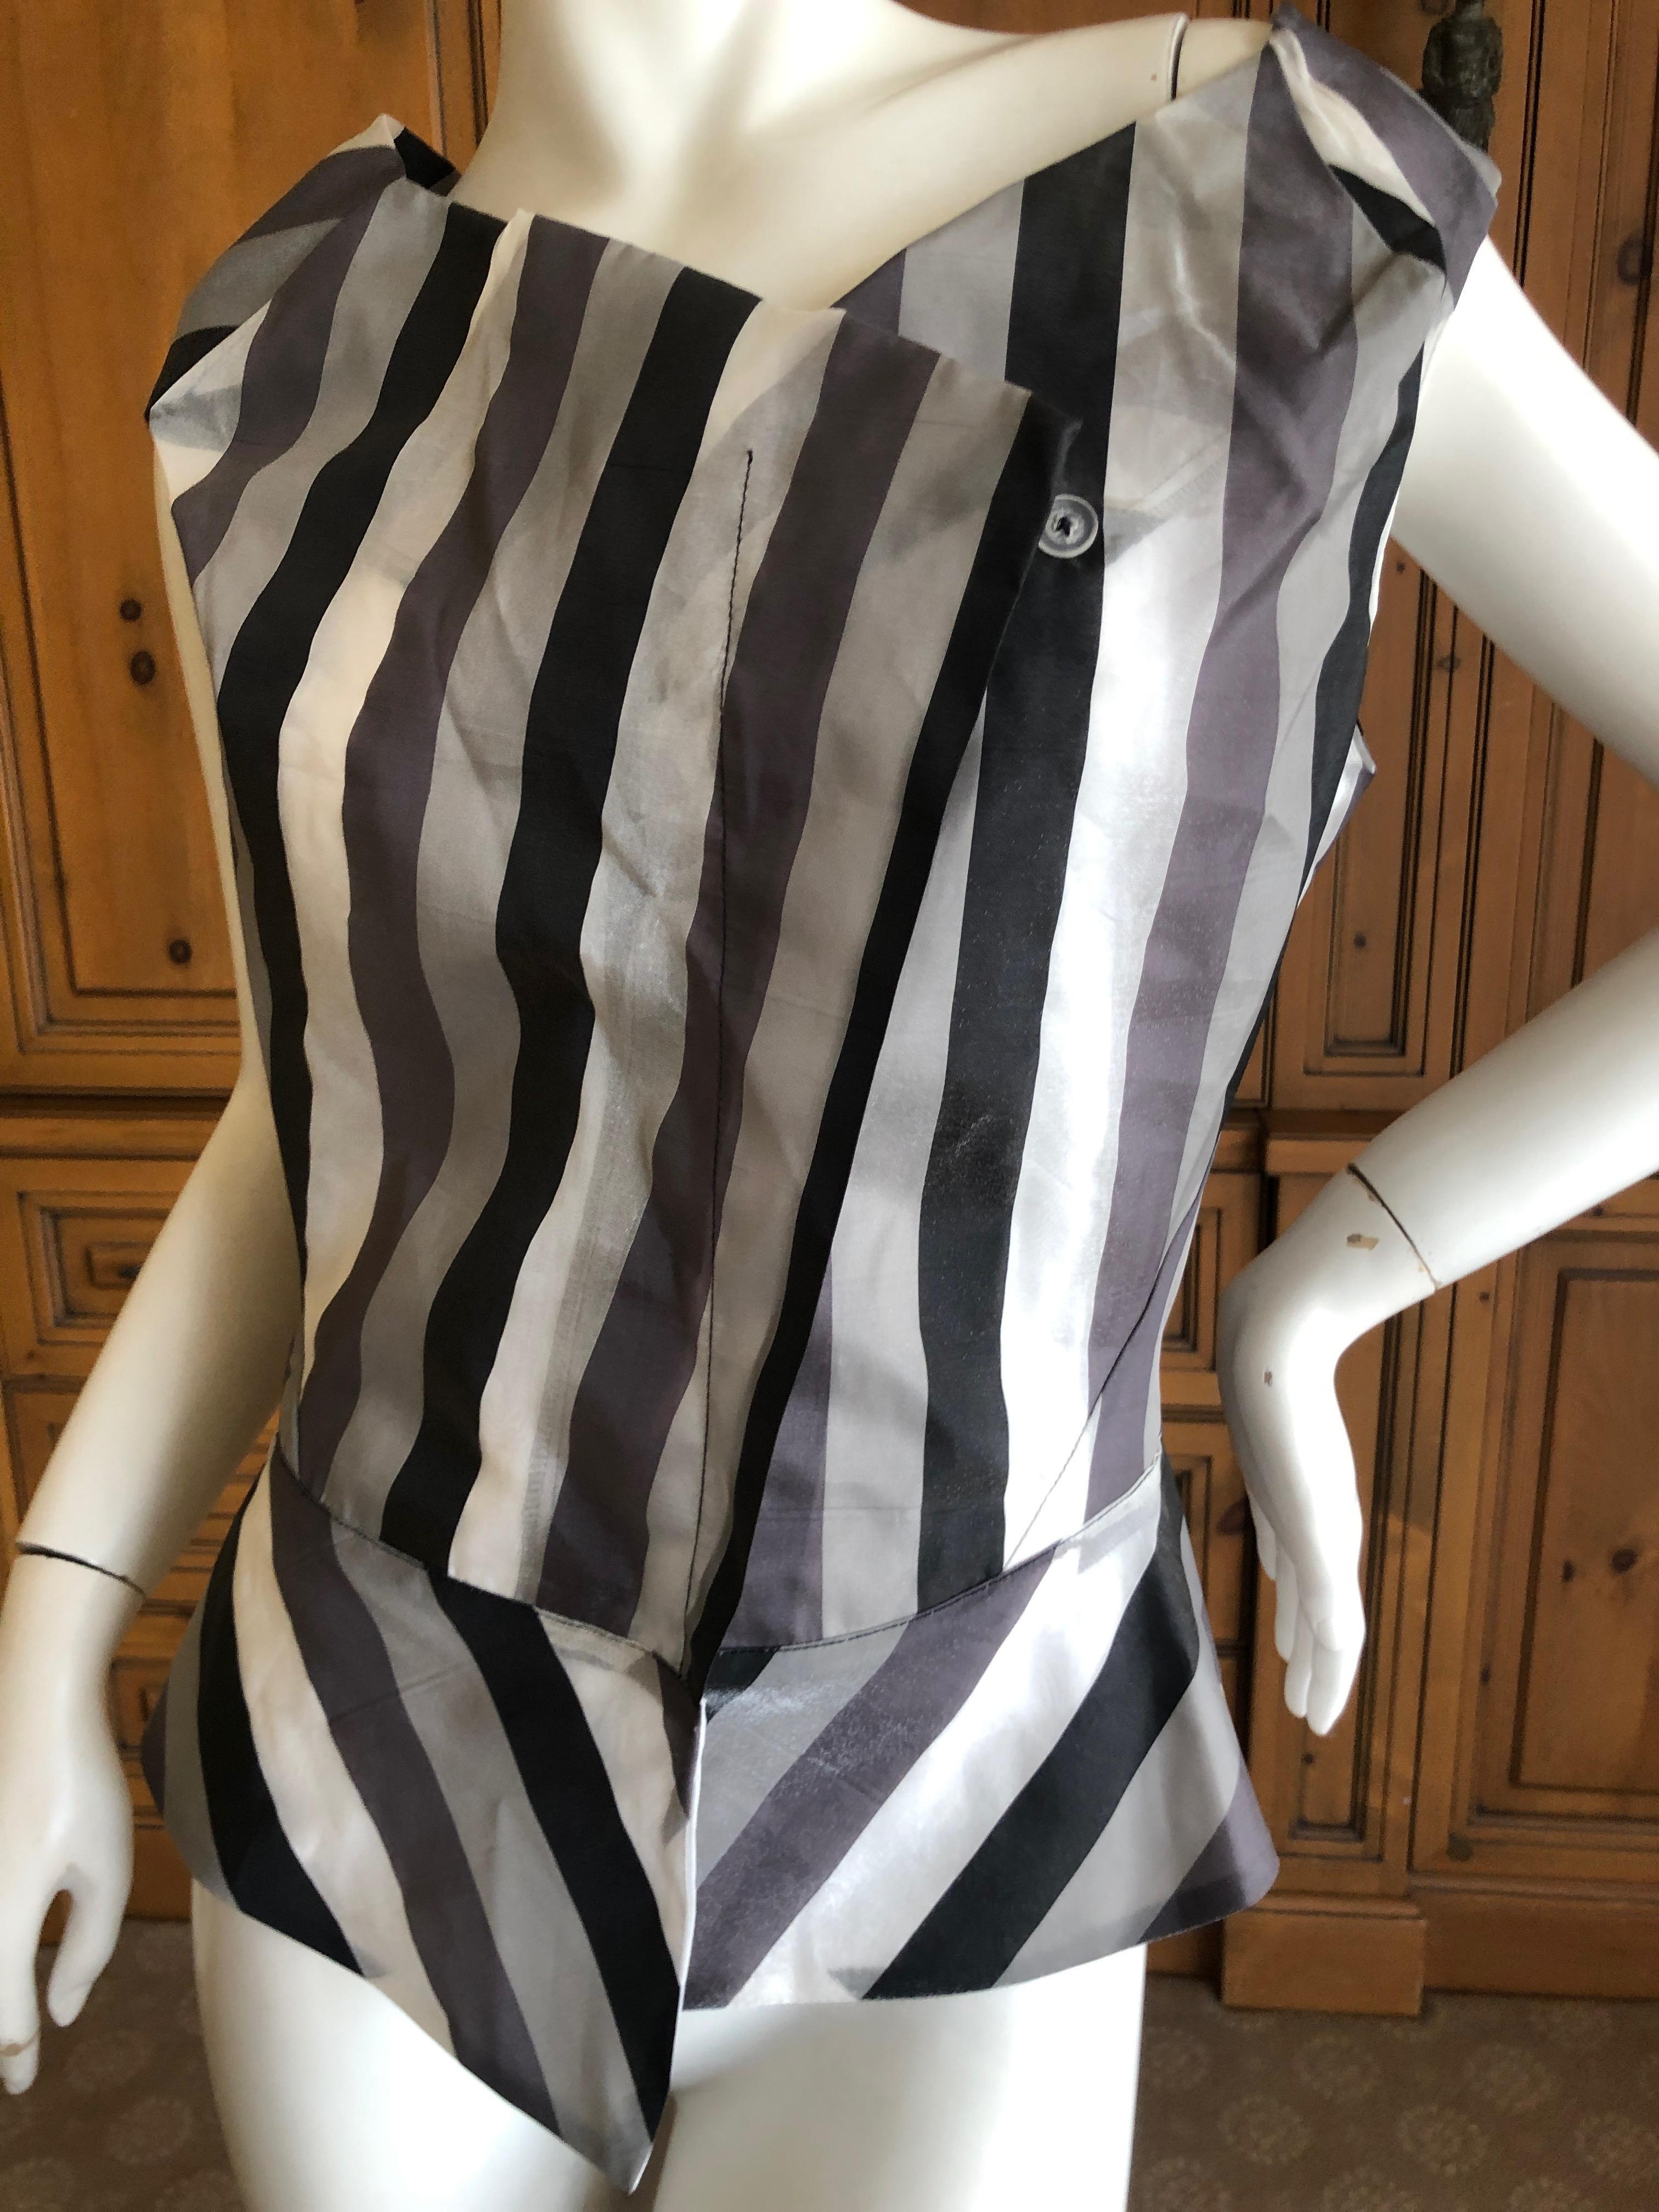 Vivienne Westwood Anglomania Gray Stripe Top
Size 42
Bust 38